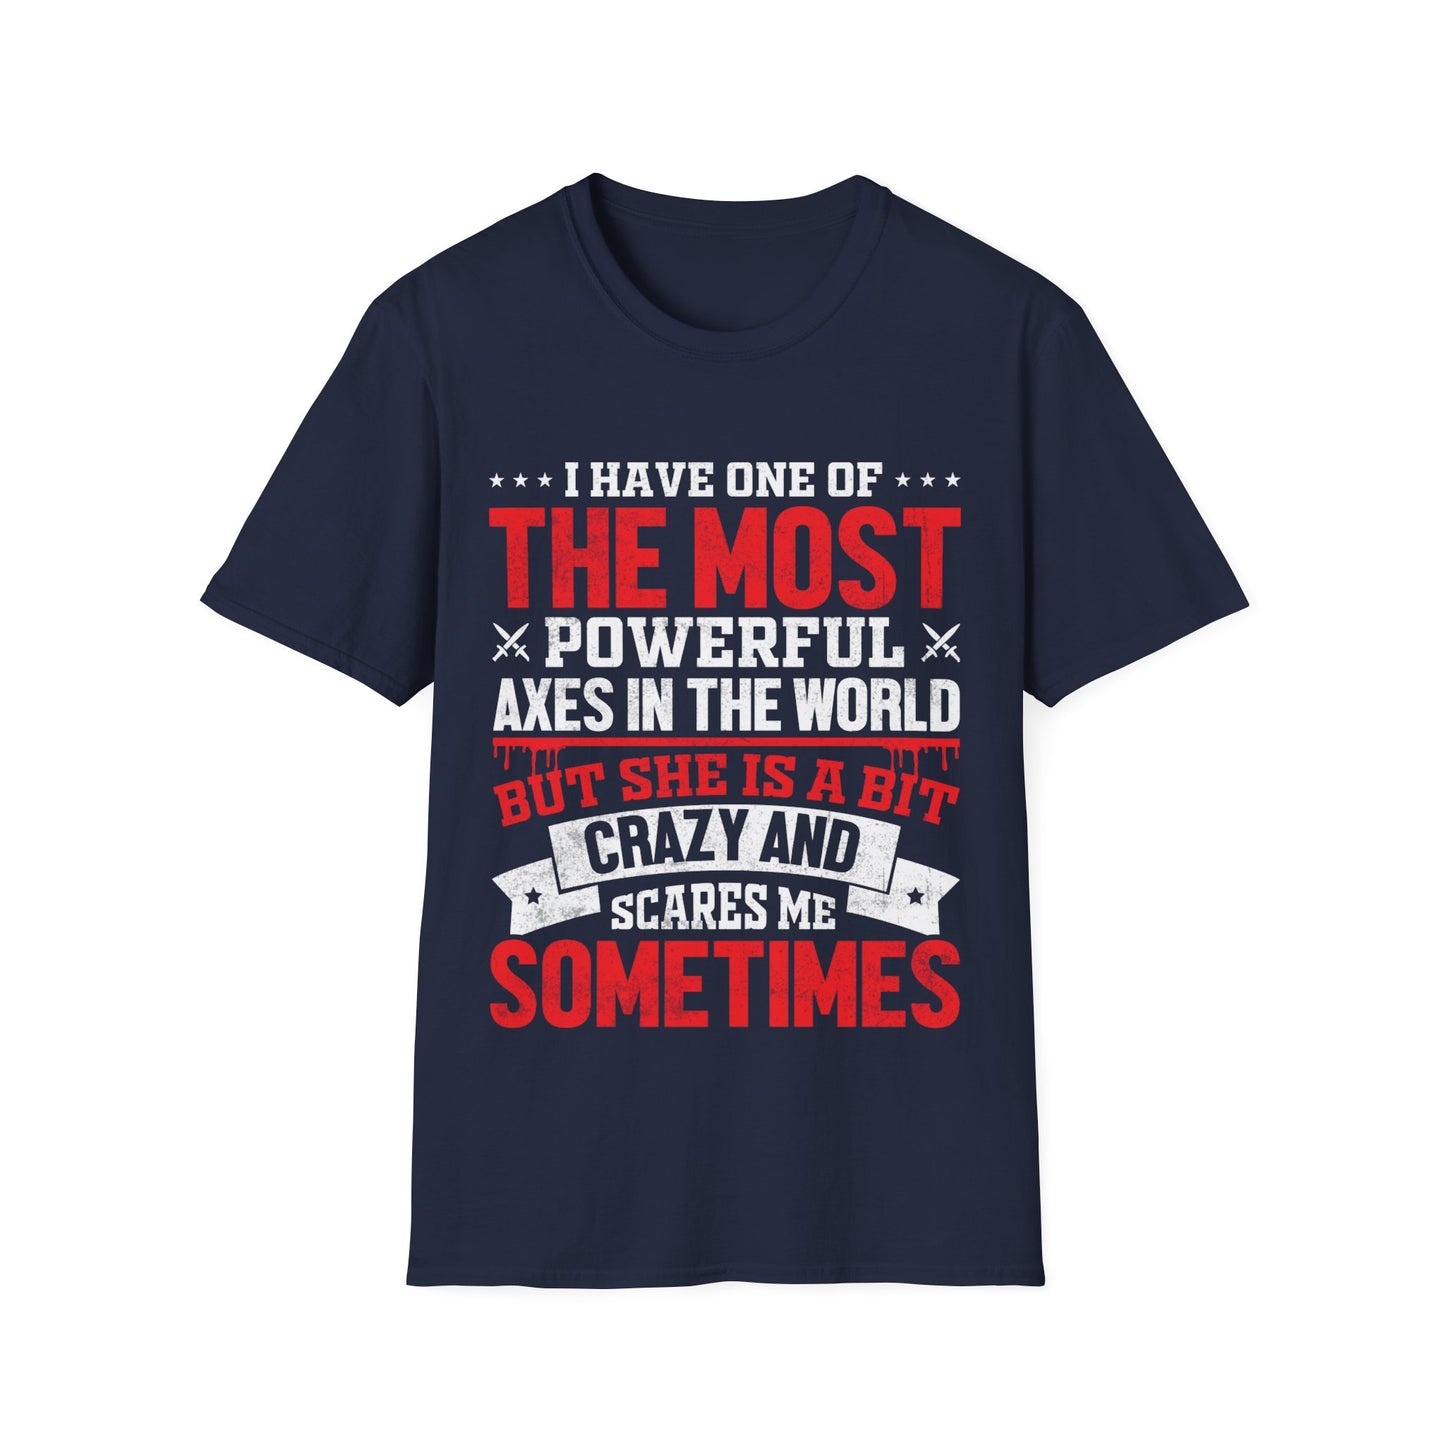 I Have One Of The Most Powerful Axes In The World But She Is A Bit Crazy And Scares Me Sometimes T-Shirt